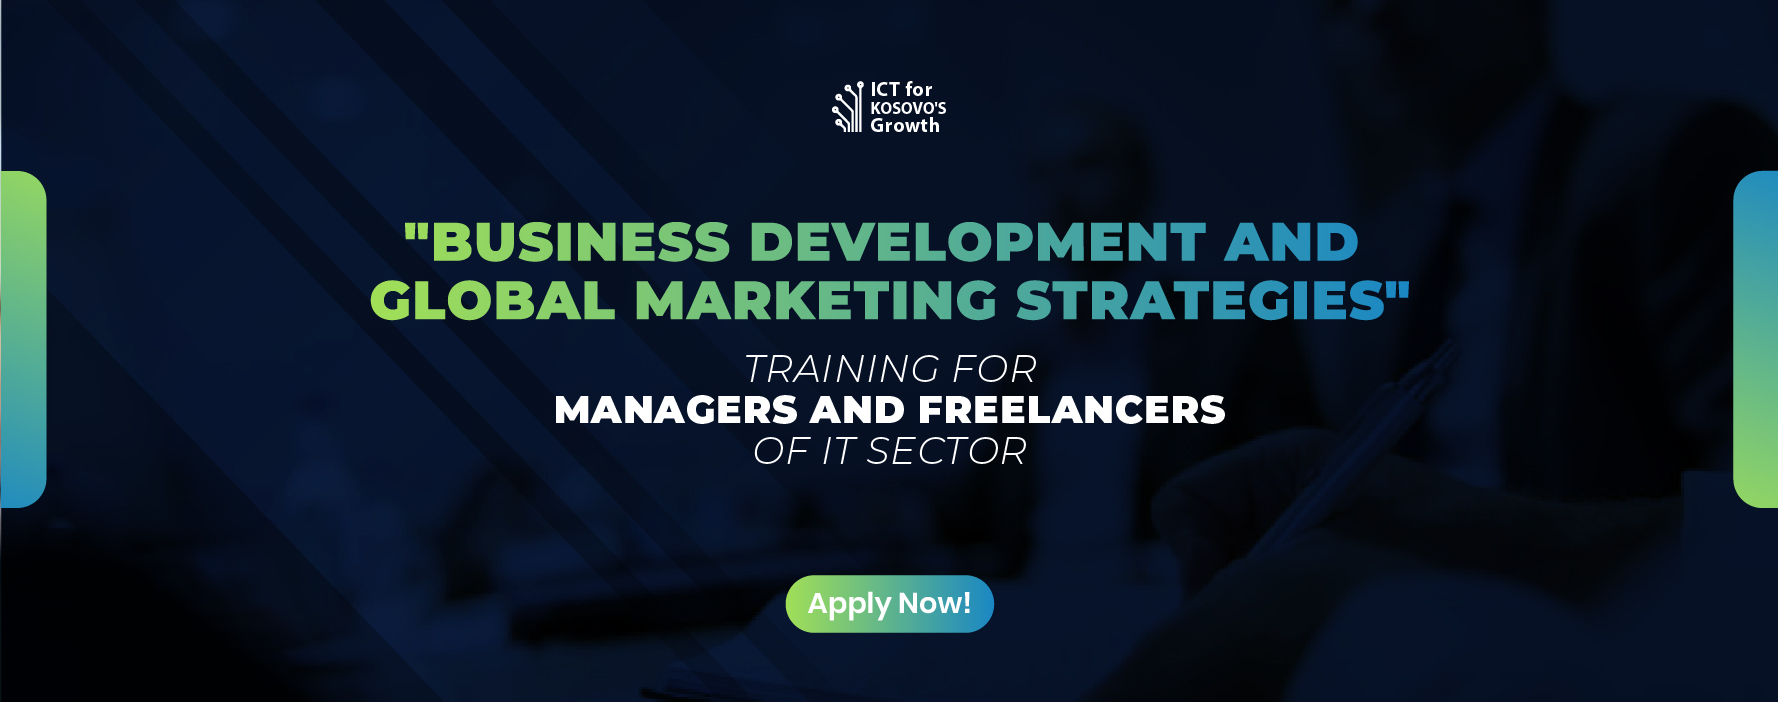 Invitation to Apply for Business development and global marketing strategies training for managers and freelancers of ICT sector